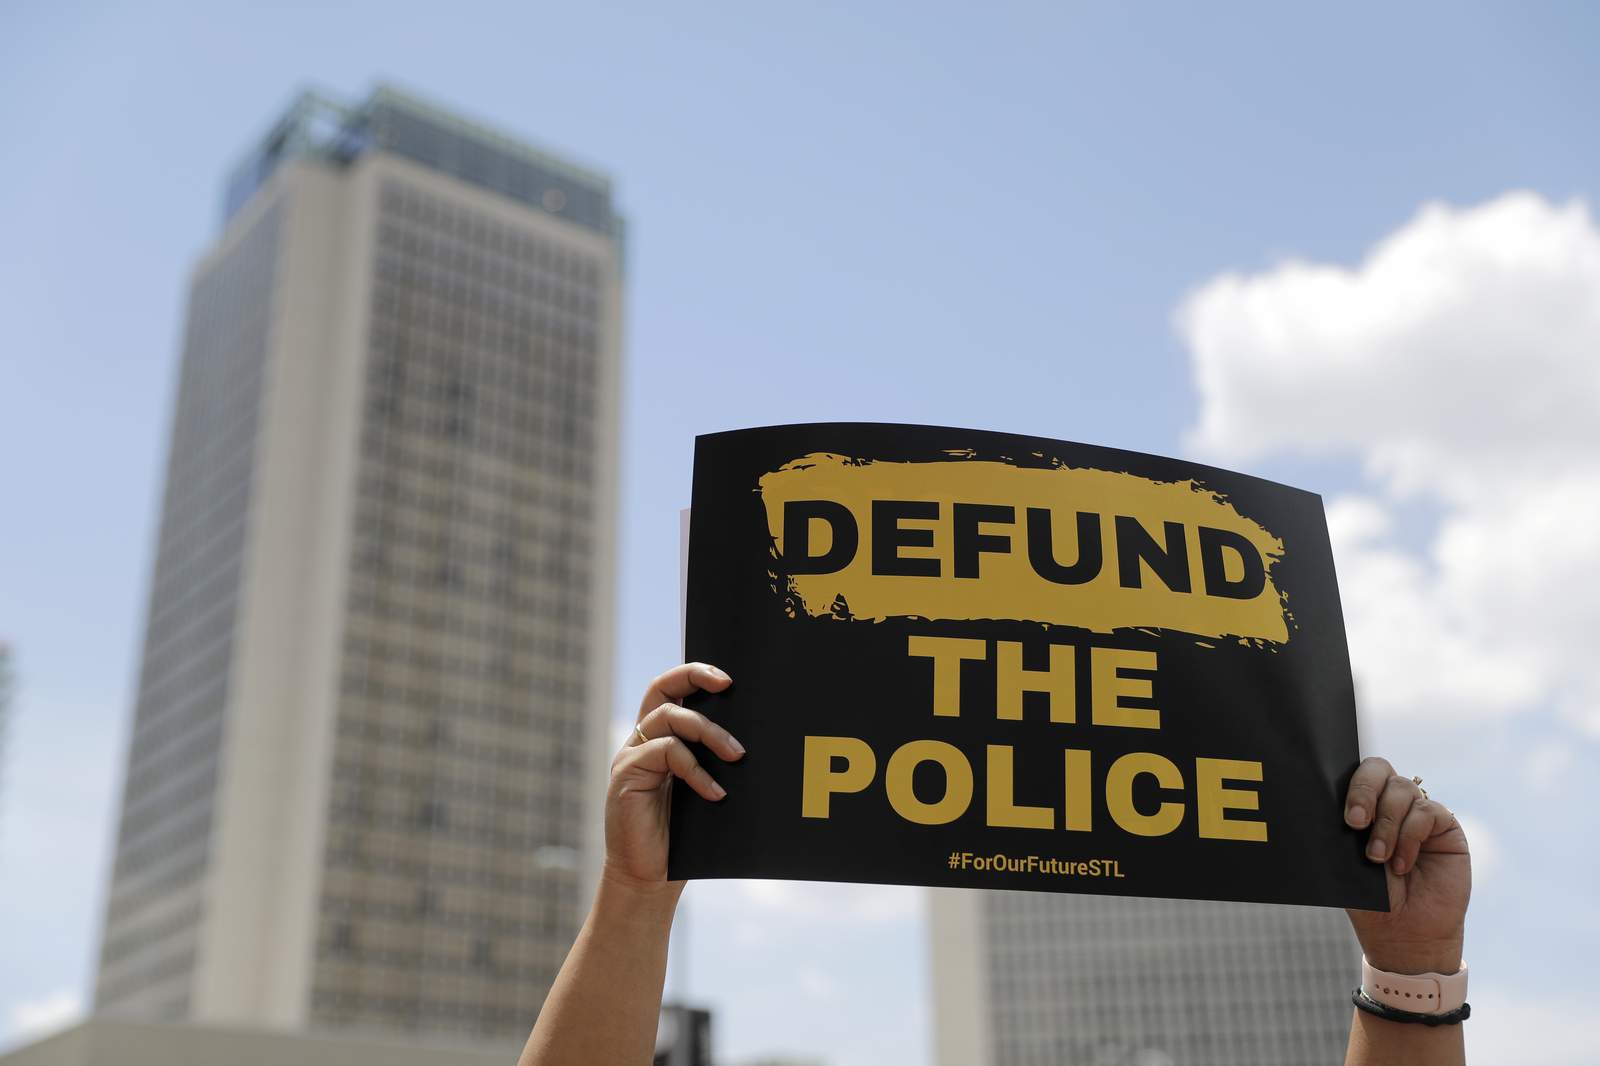 Up next for police defunding advocates: Win local elections